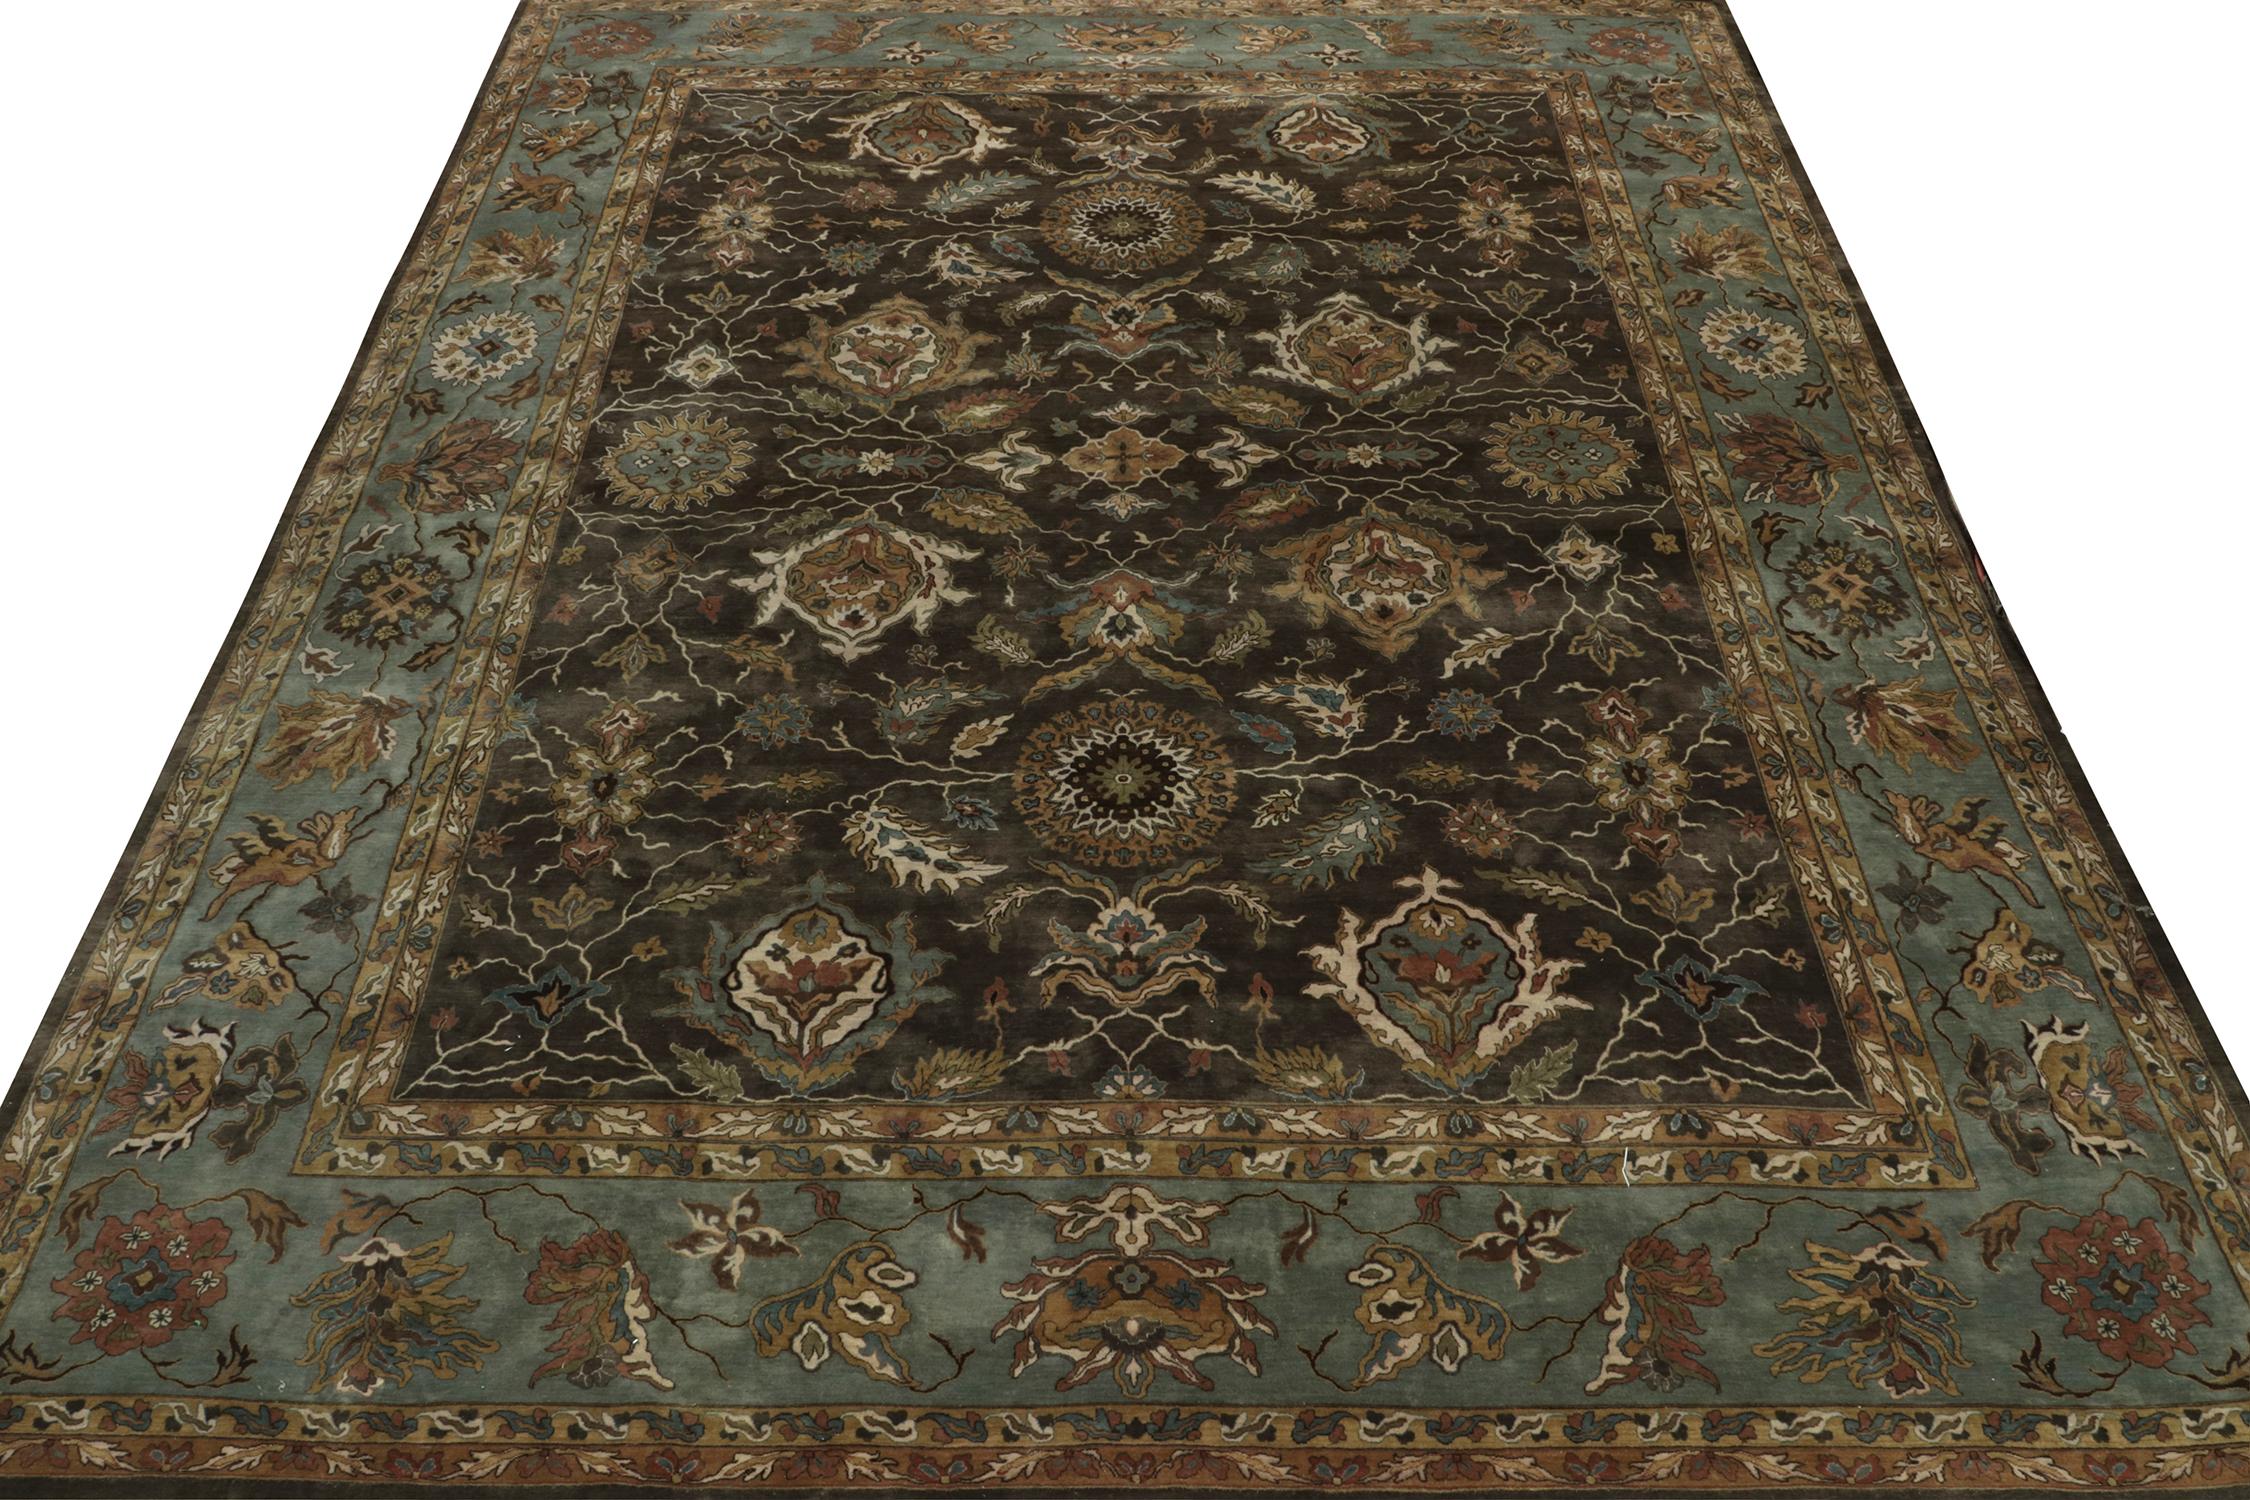 Indian Rug & Kilim’s Classic Tabriz style rug in Brown, Blue and Gold Floral Patterns For Sale